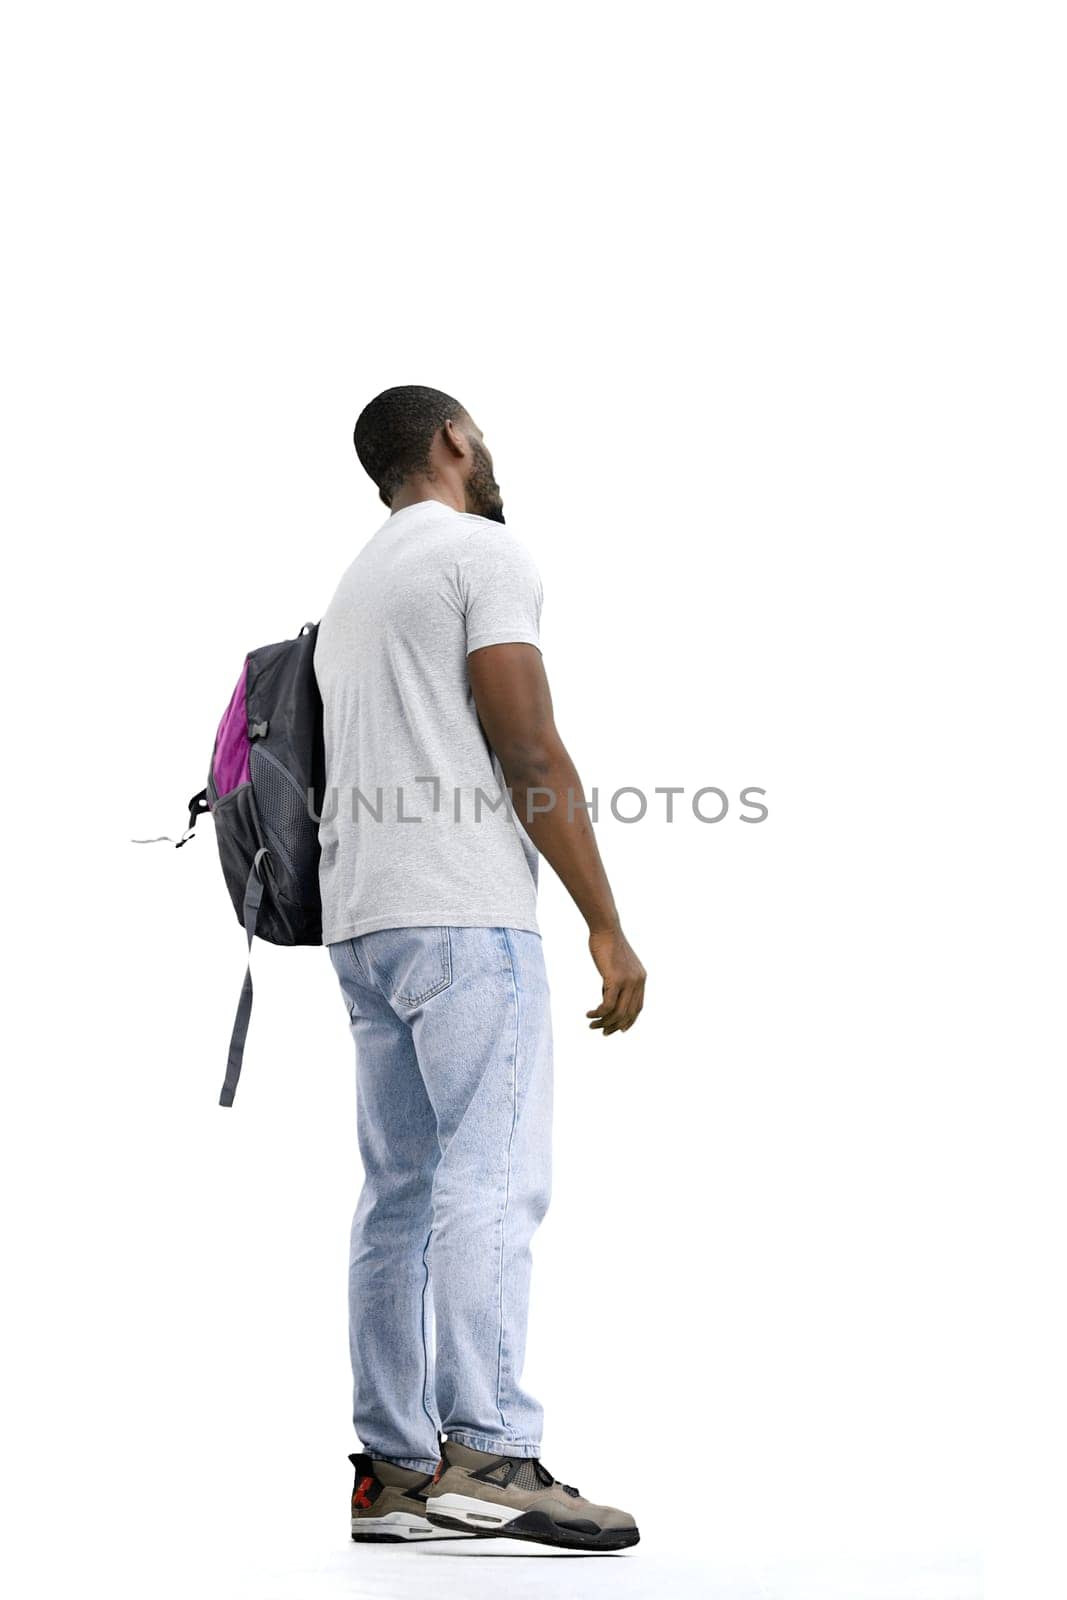 A man, full-length, on a white background, with a backpack by Prosto